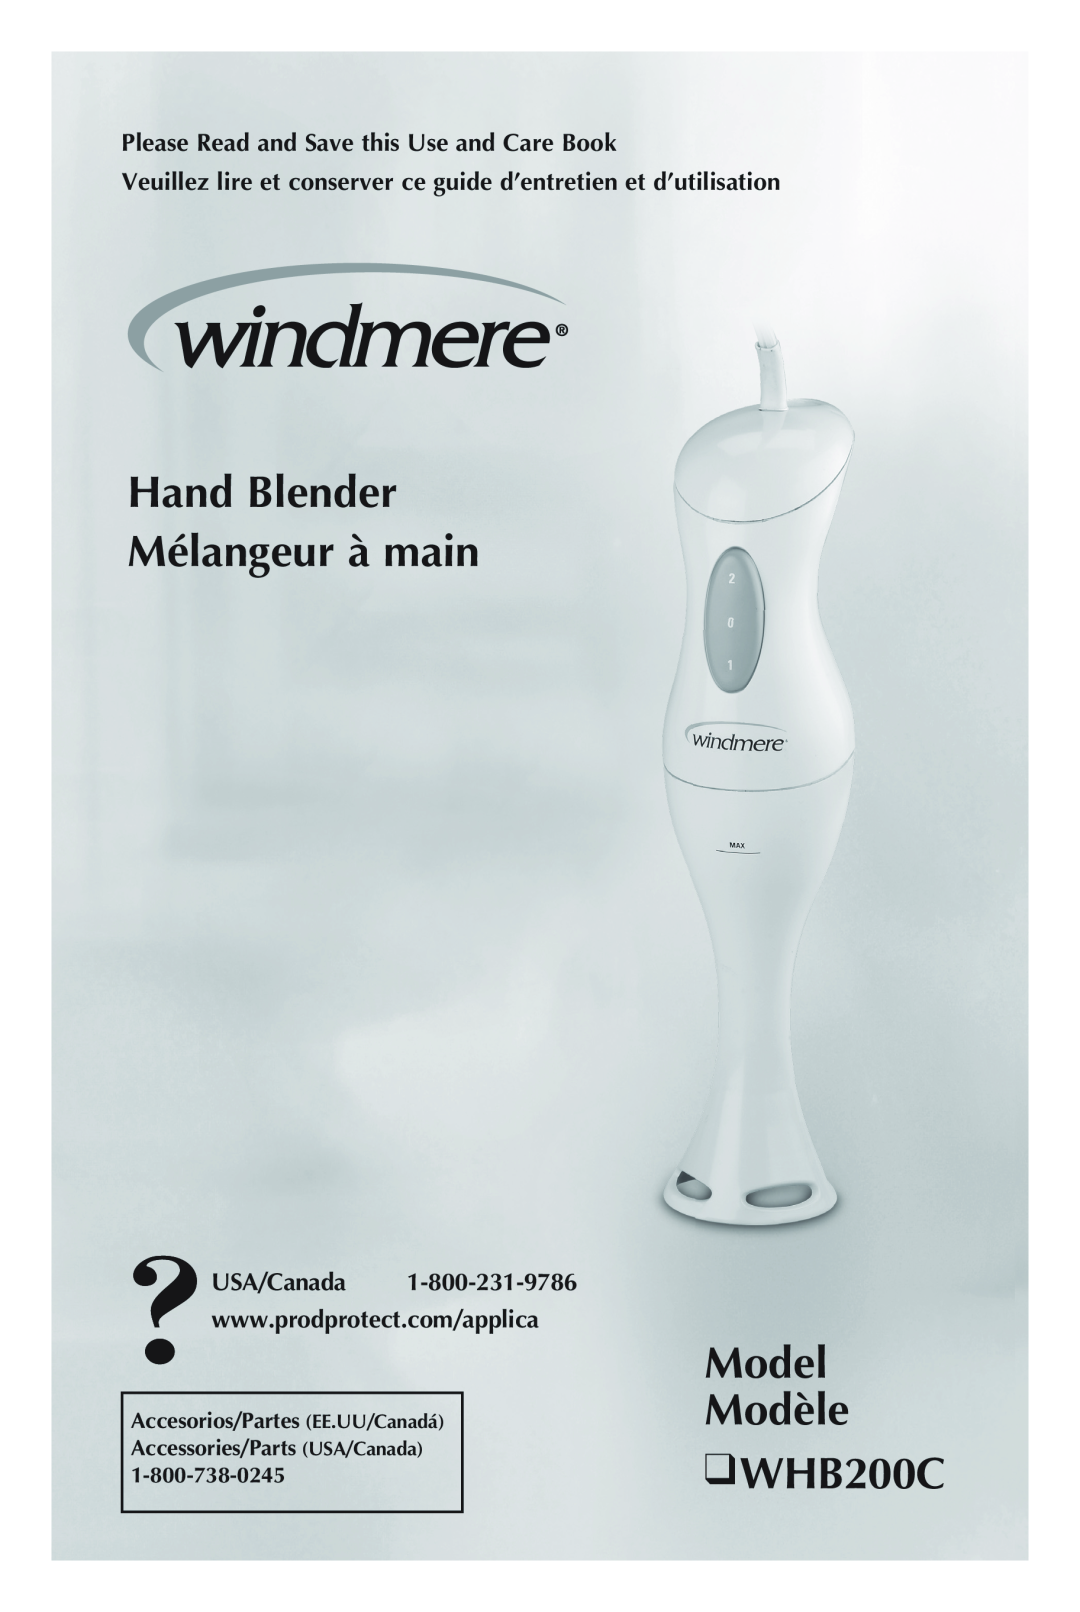 Windmere manual Hand Blender Mélangeur à main, Model Modèle WHB200C, Please Read and Save this Use and Care Book 